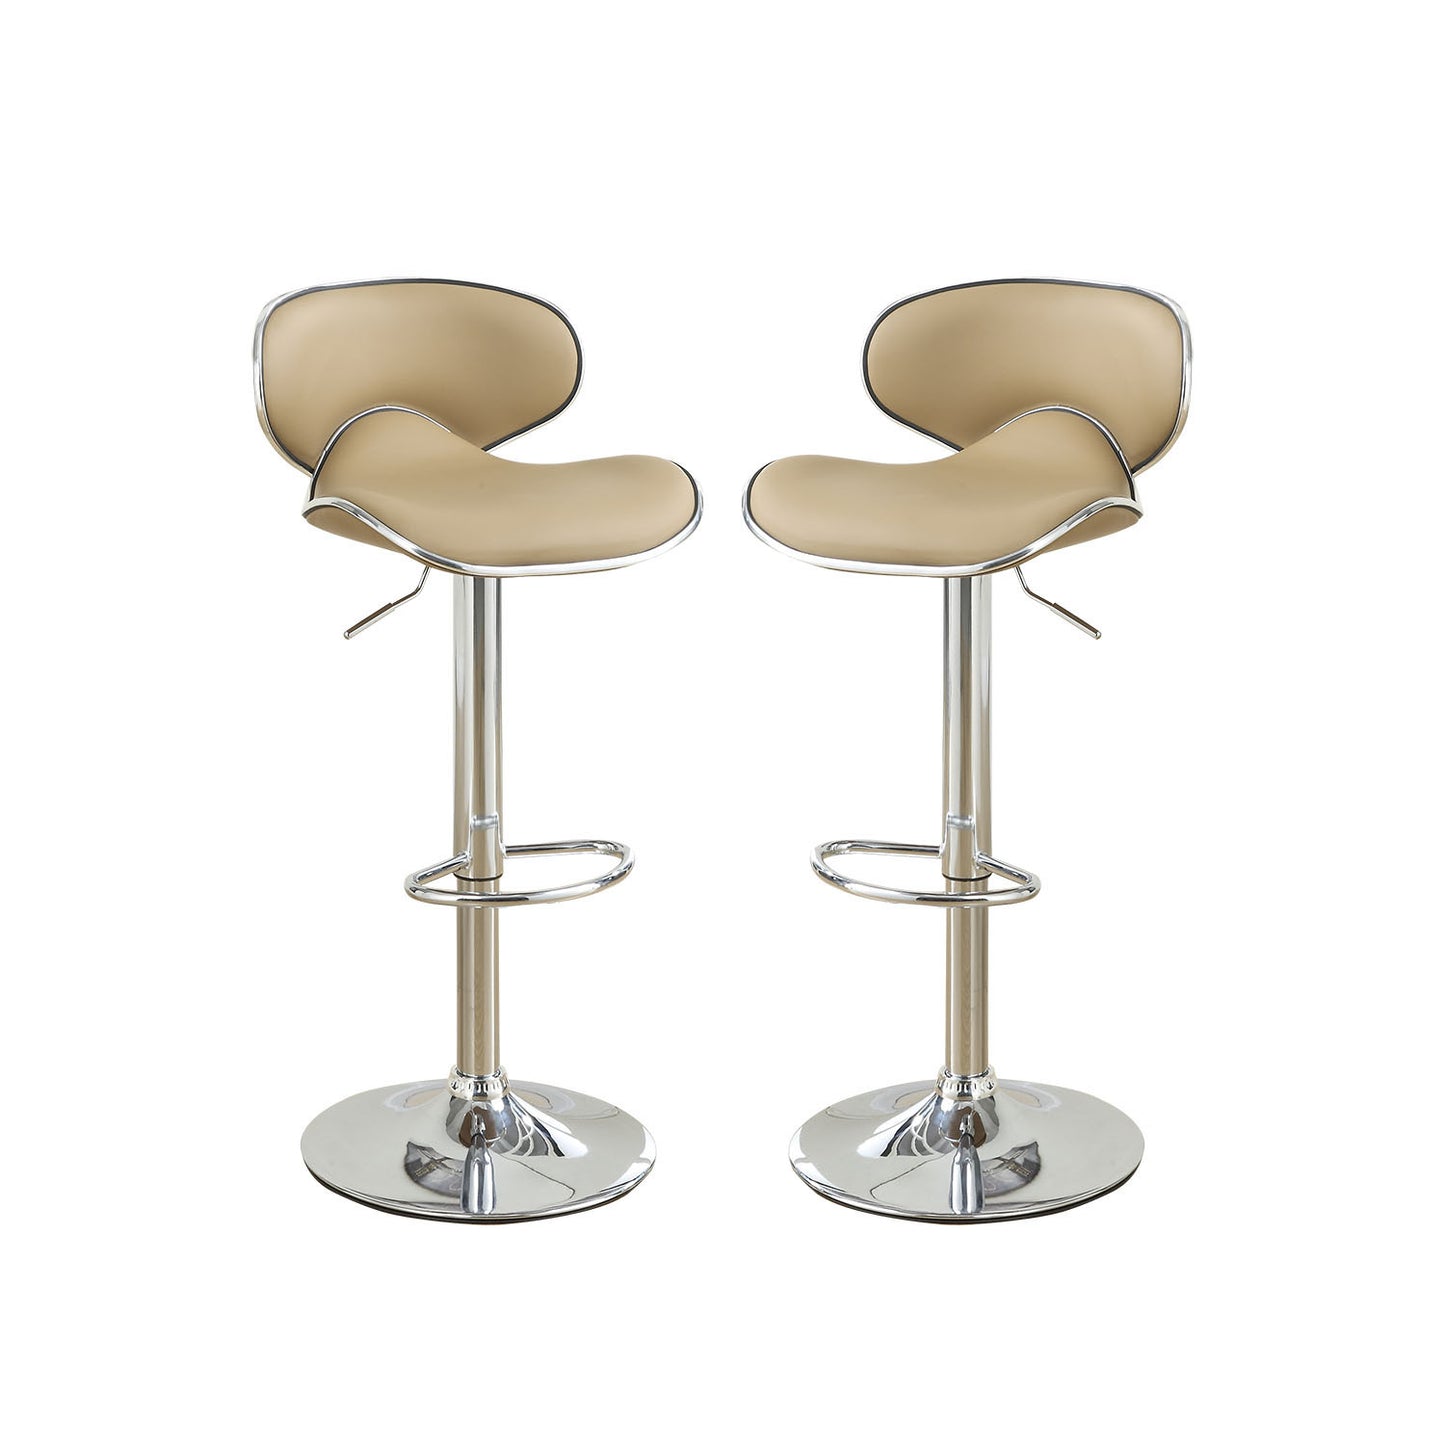 Adjustable Brown Faux Leather Bar Stools - Set of 2